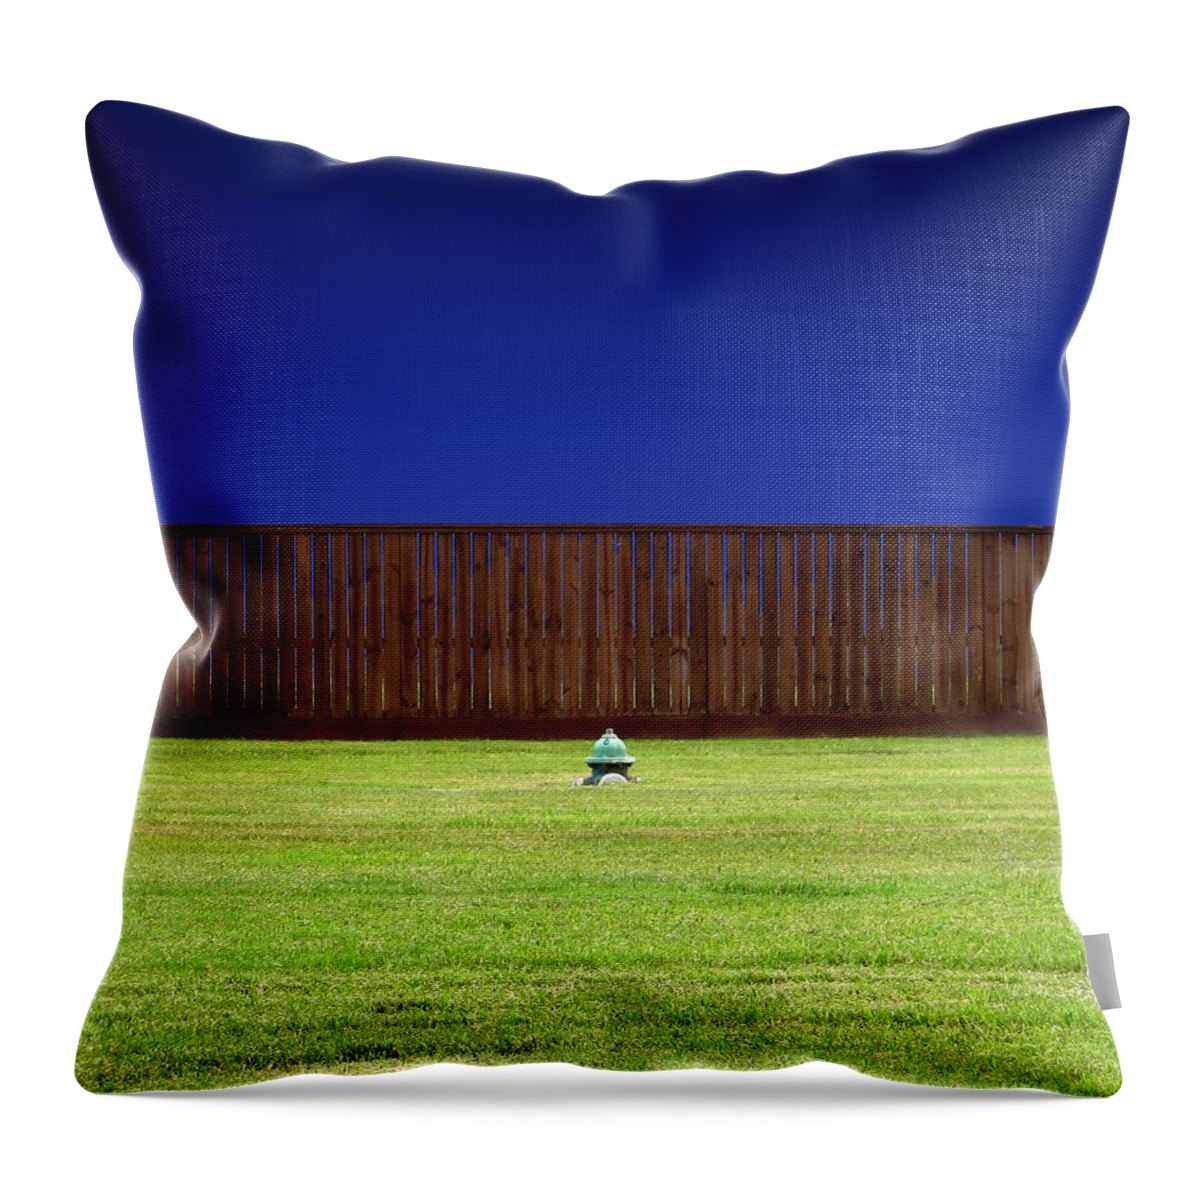 Tranquility Throw Pillow featuring the photograph Drowning In A Sea Of Grass by Kevin Trotman